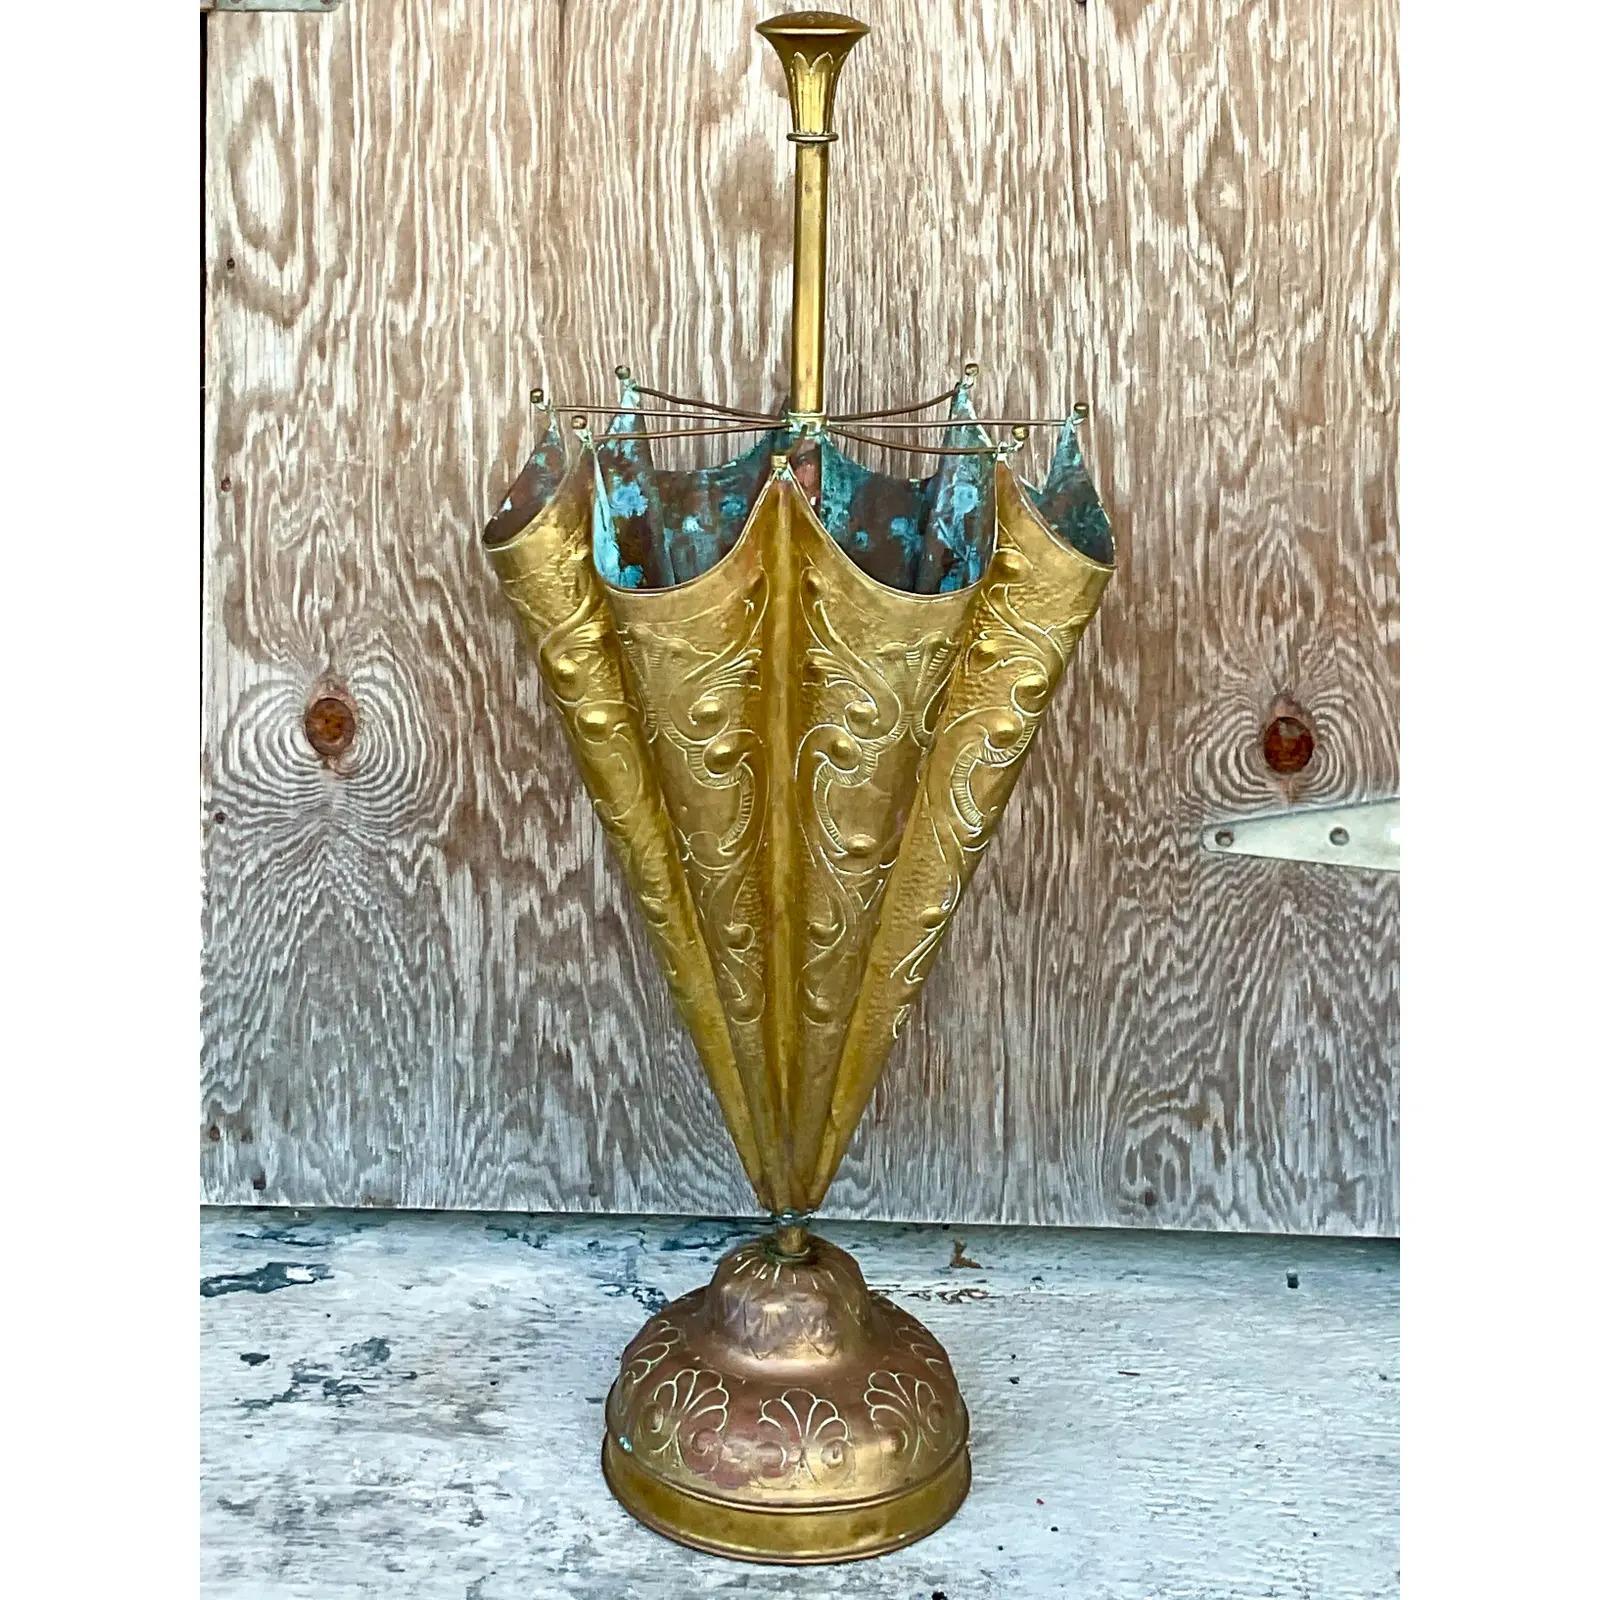 Stunning vintage Regency umbrella stand. Beautiful hammered brass in a chic and charming design. Beautiful patina to the brass from time. Acquired from a Palm Beach estate.